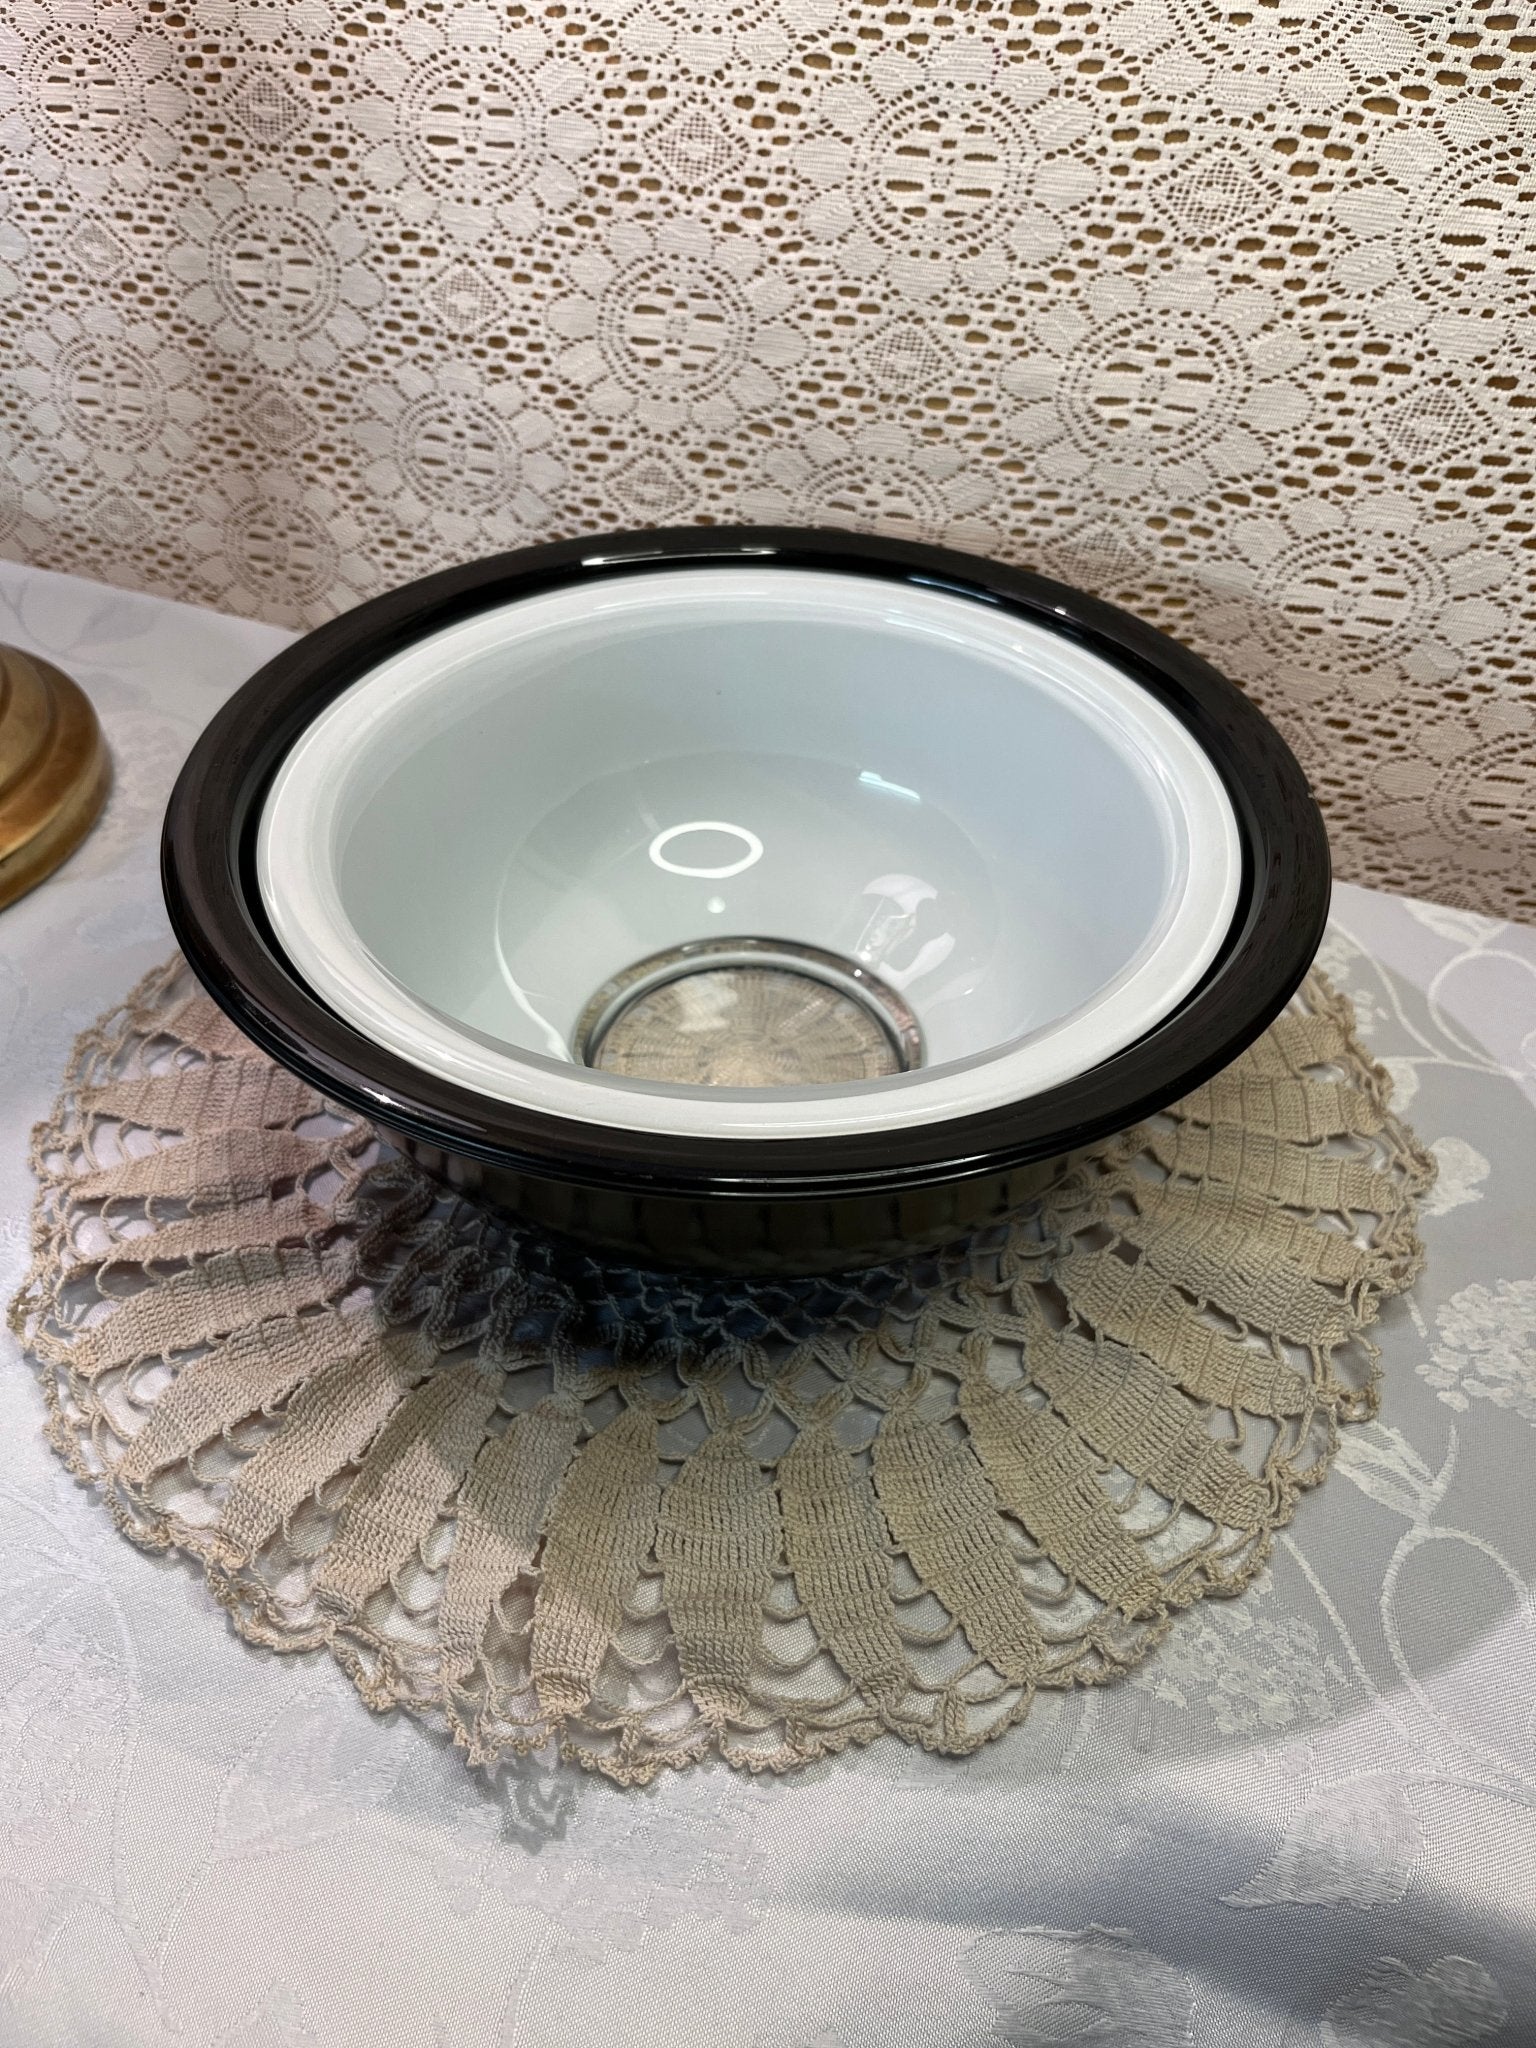 Black and White 3 Piece Pyrex Mixing Bowl Set - Unique Thrifting Chilliwack